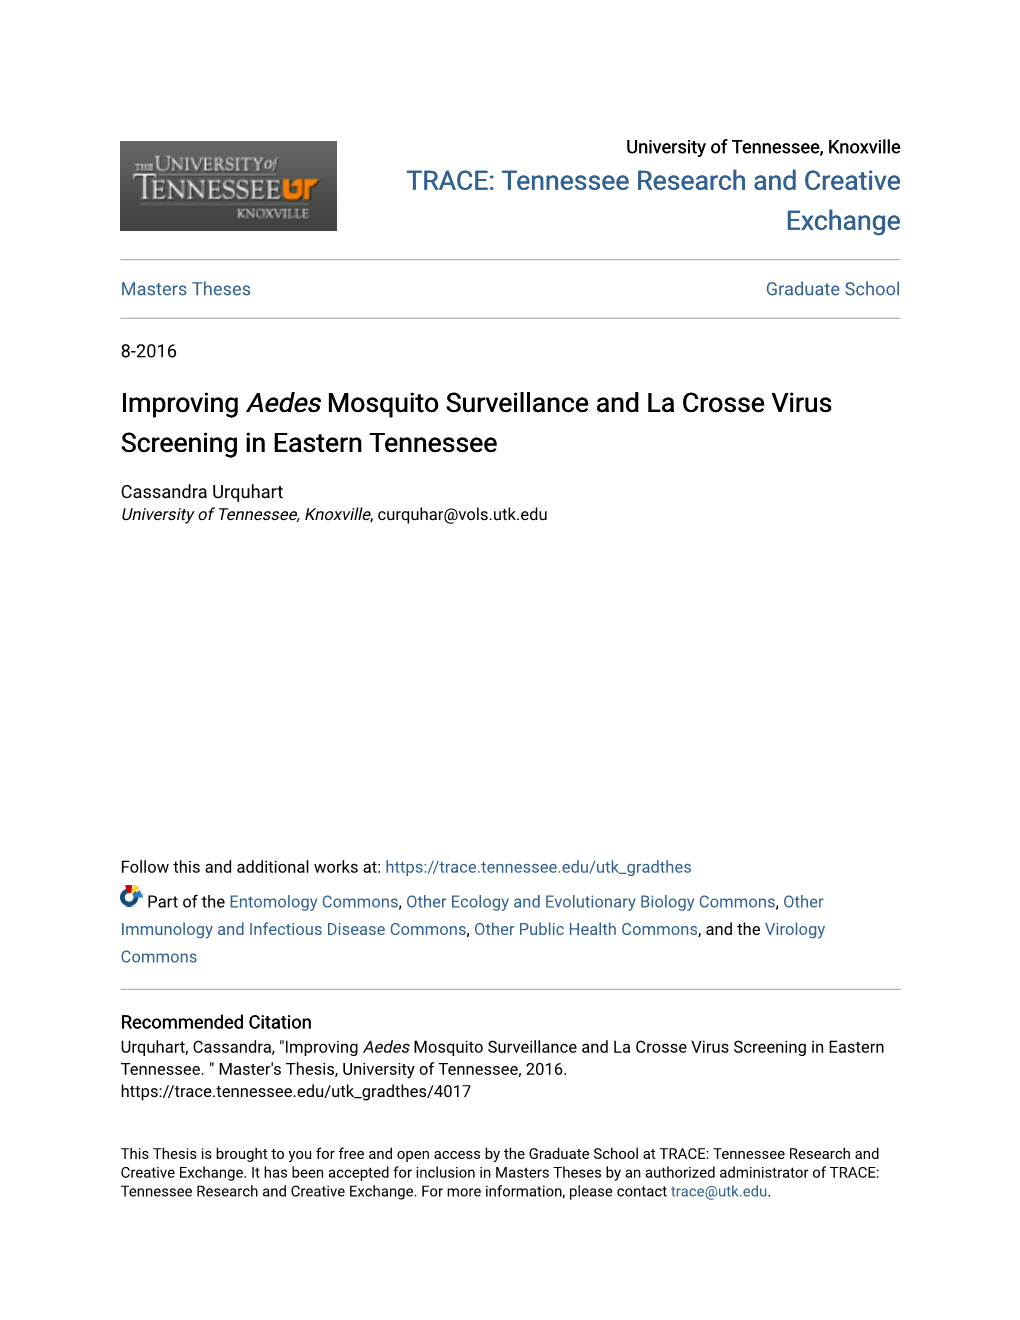 &lt;I&gt;Aedes&lt;/I&gt; Mosquito Surveillance and La Crosse Virus Screening In